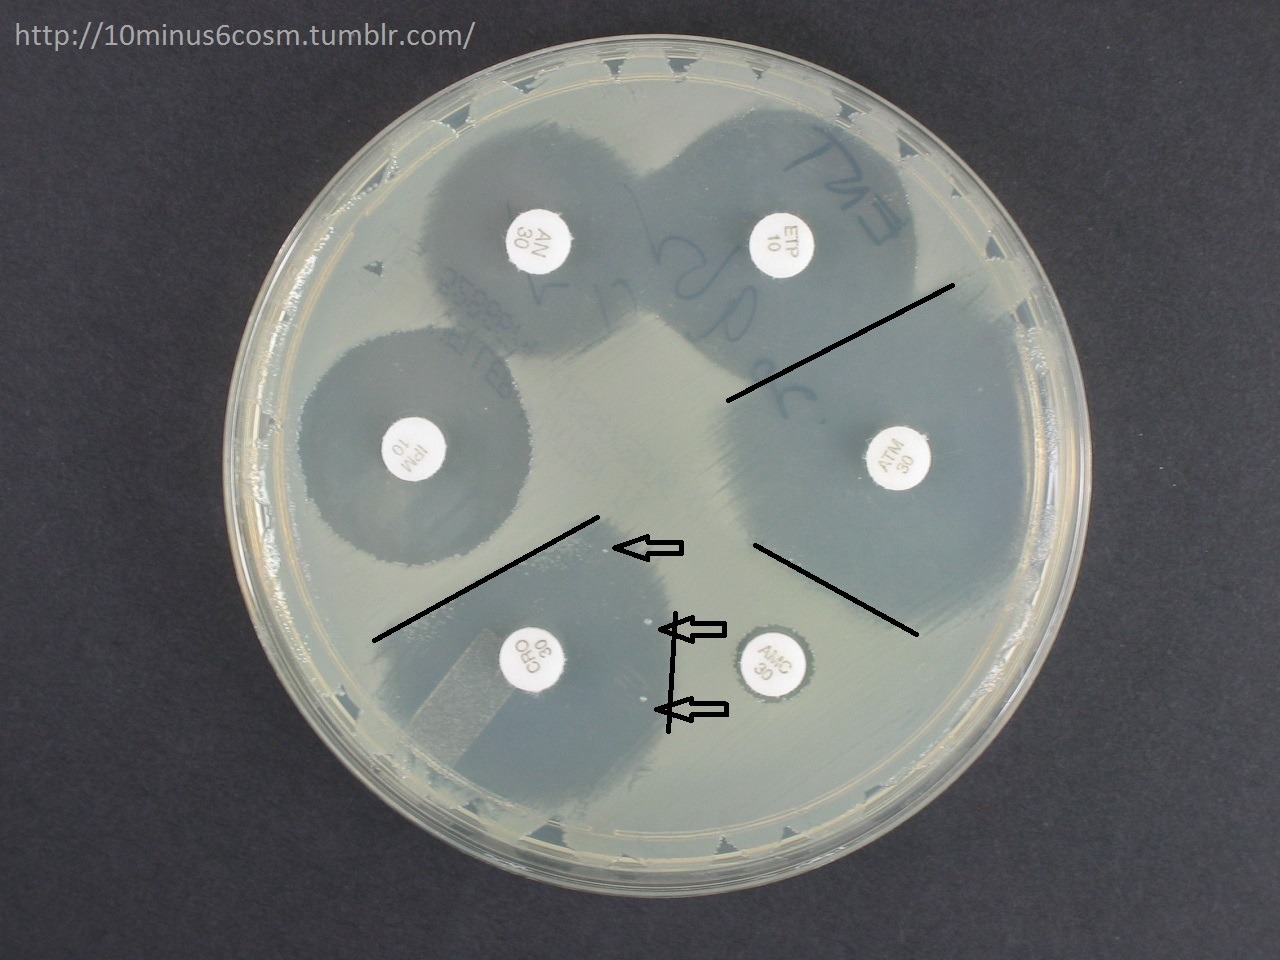 MICROCOSM Antimicrobial Resistance Series 12 AmpC and...